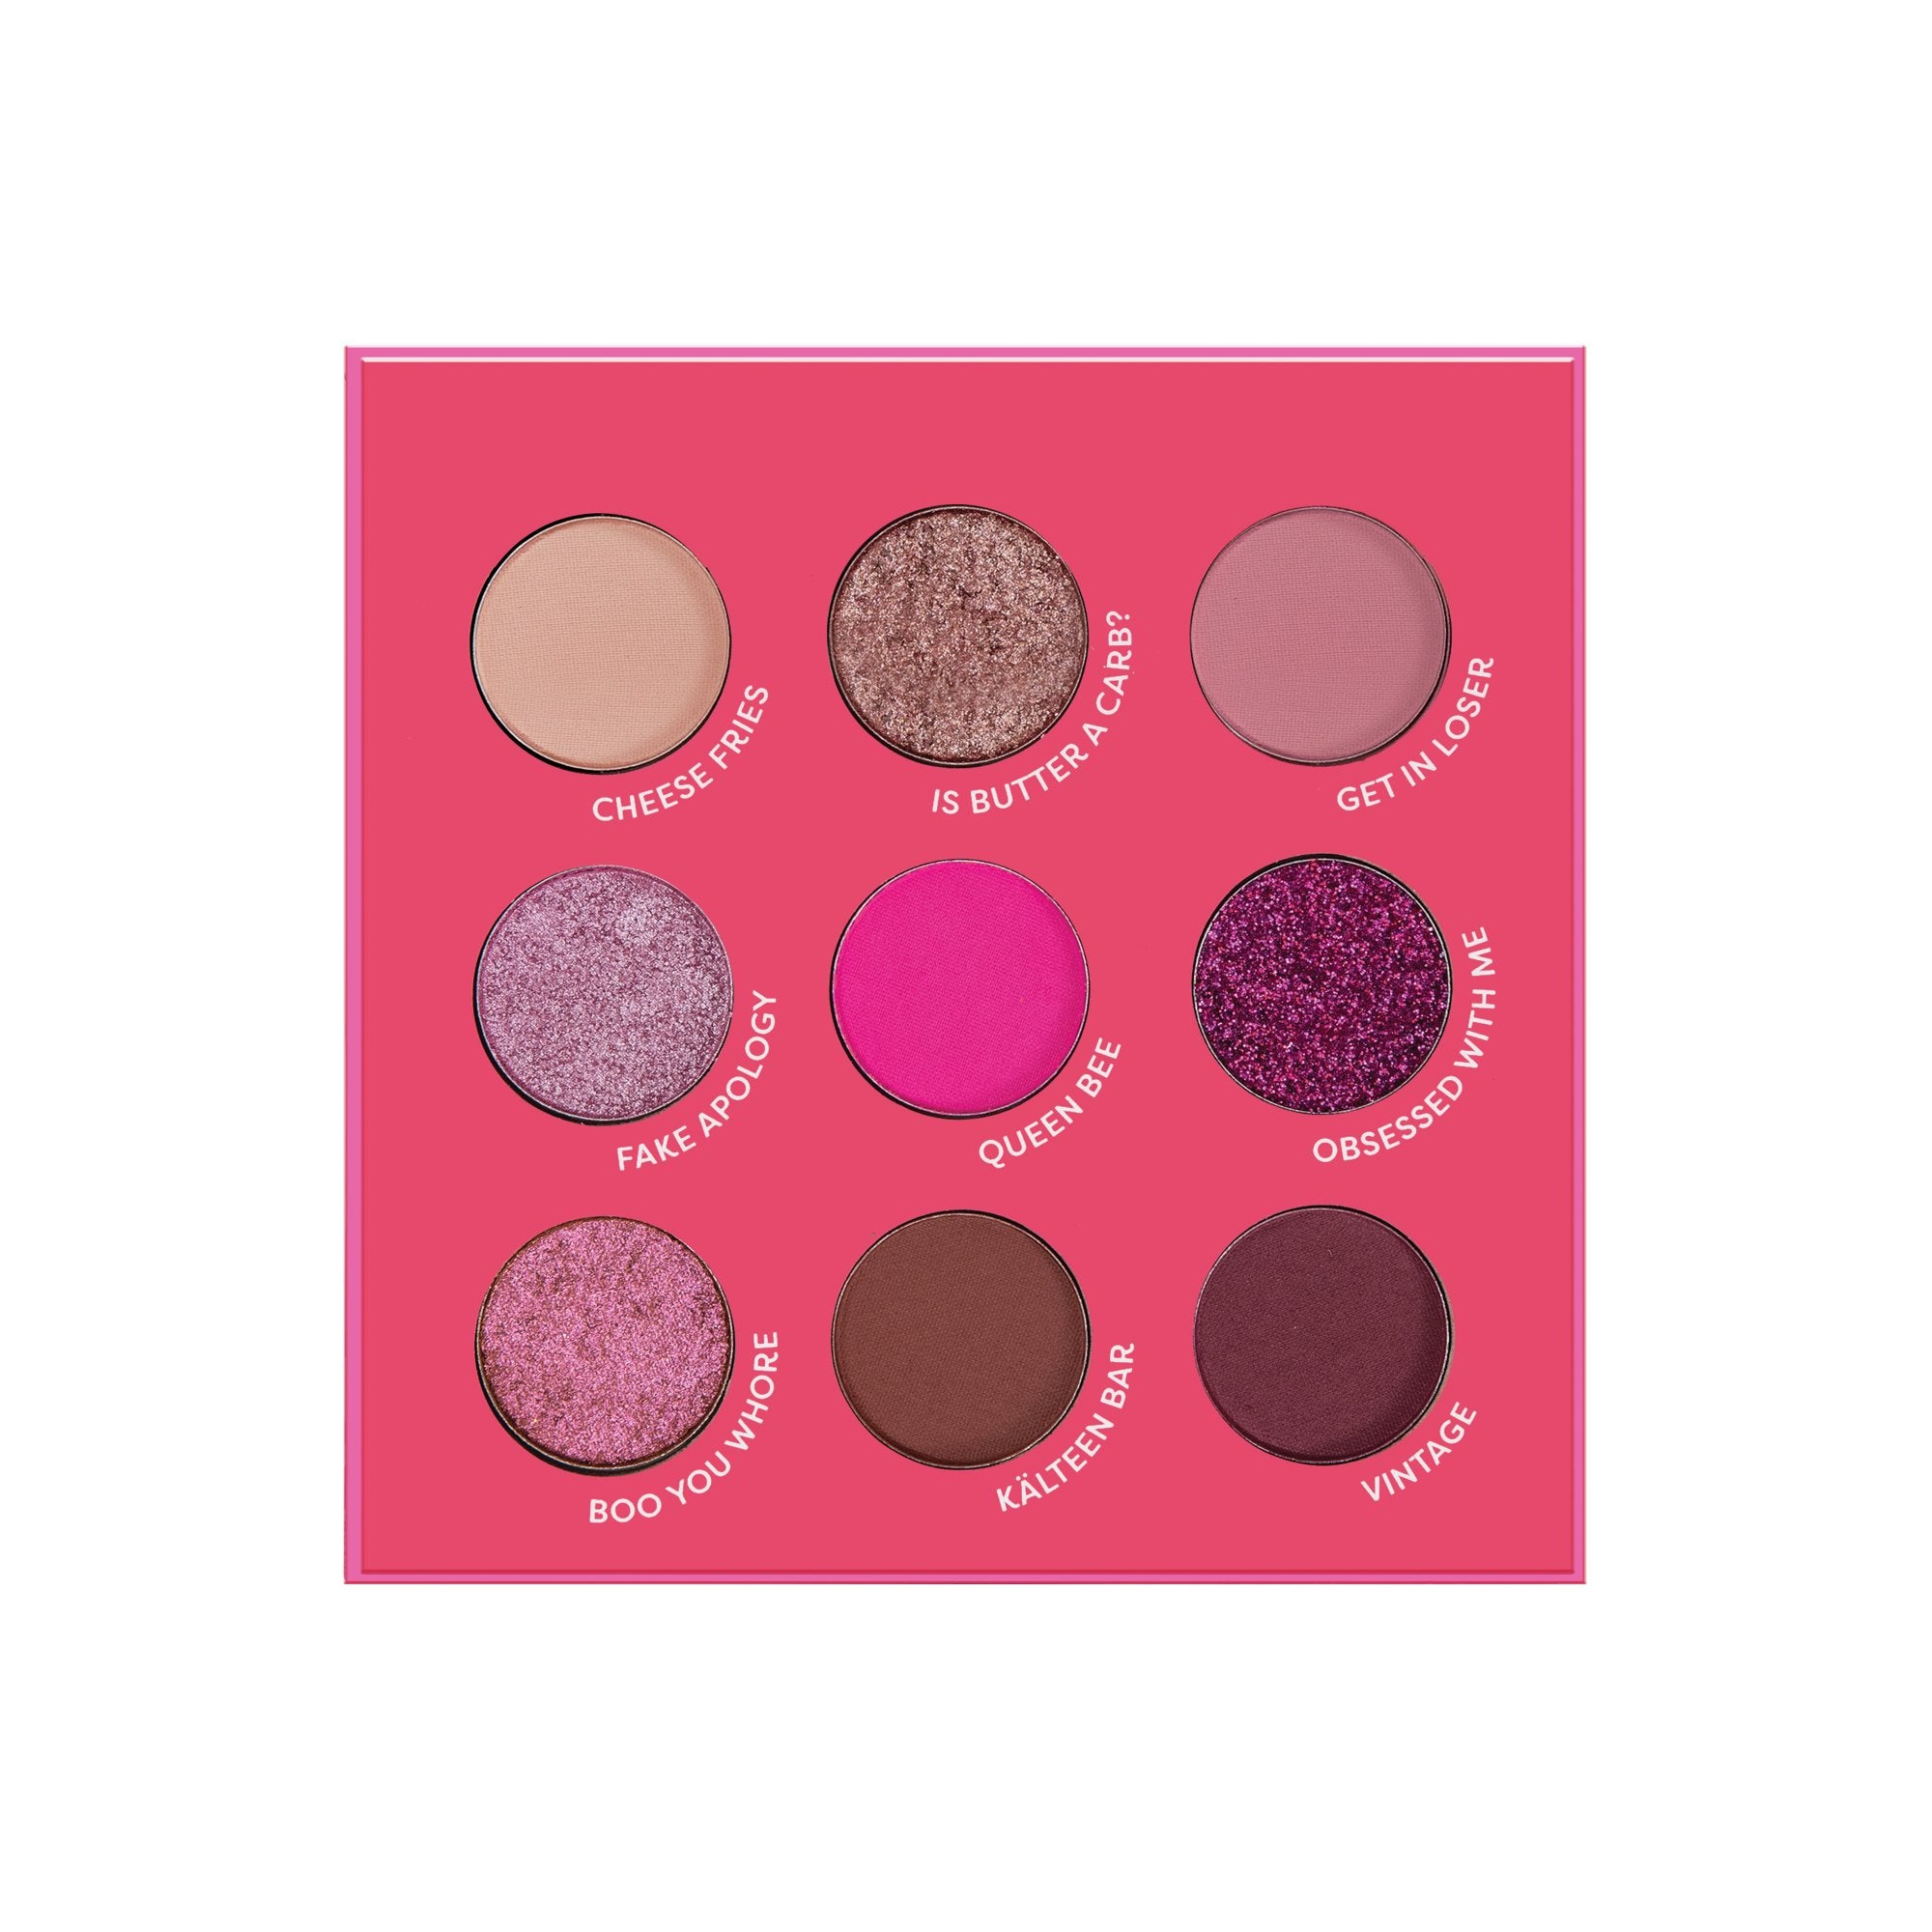 Profusion - Mean Girls Property of Regina George Palette